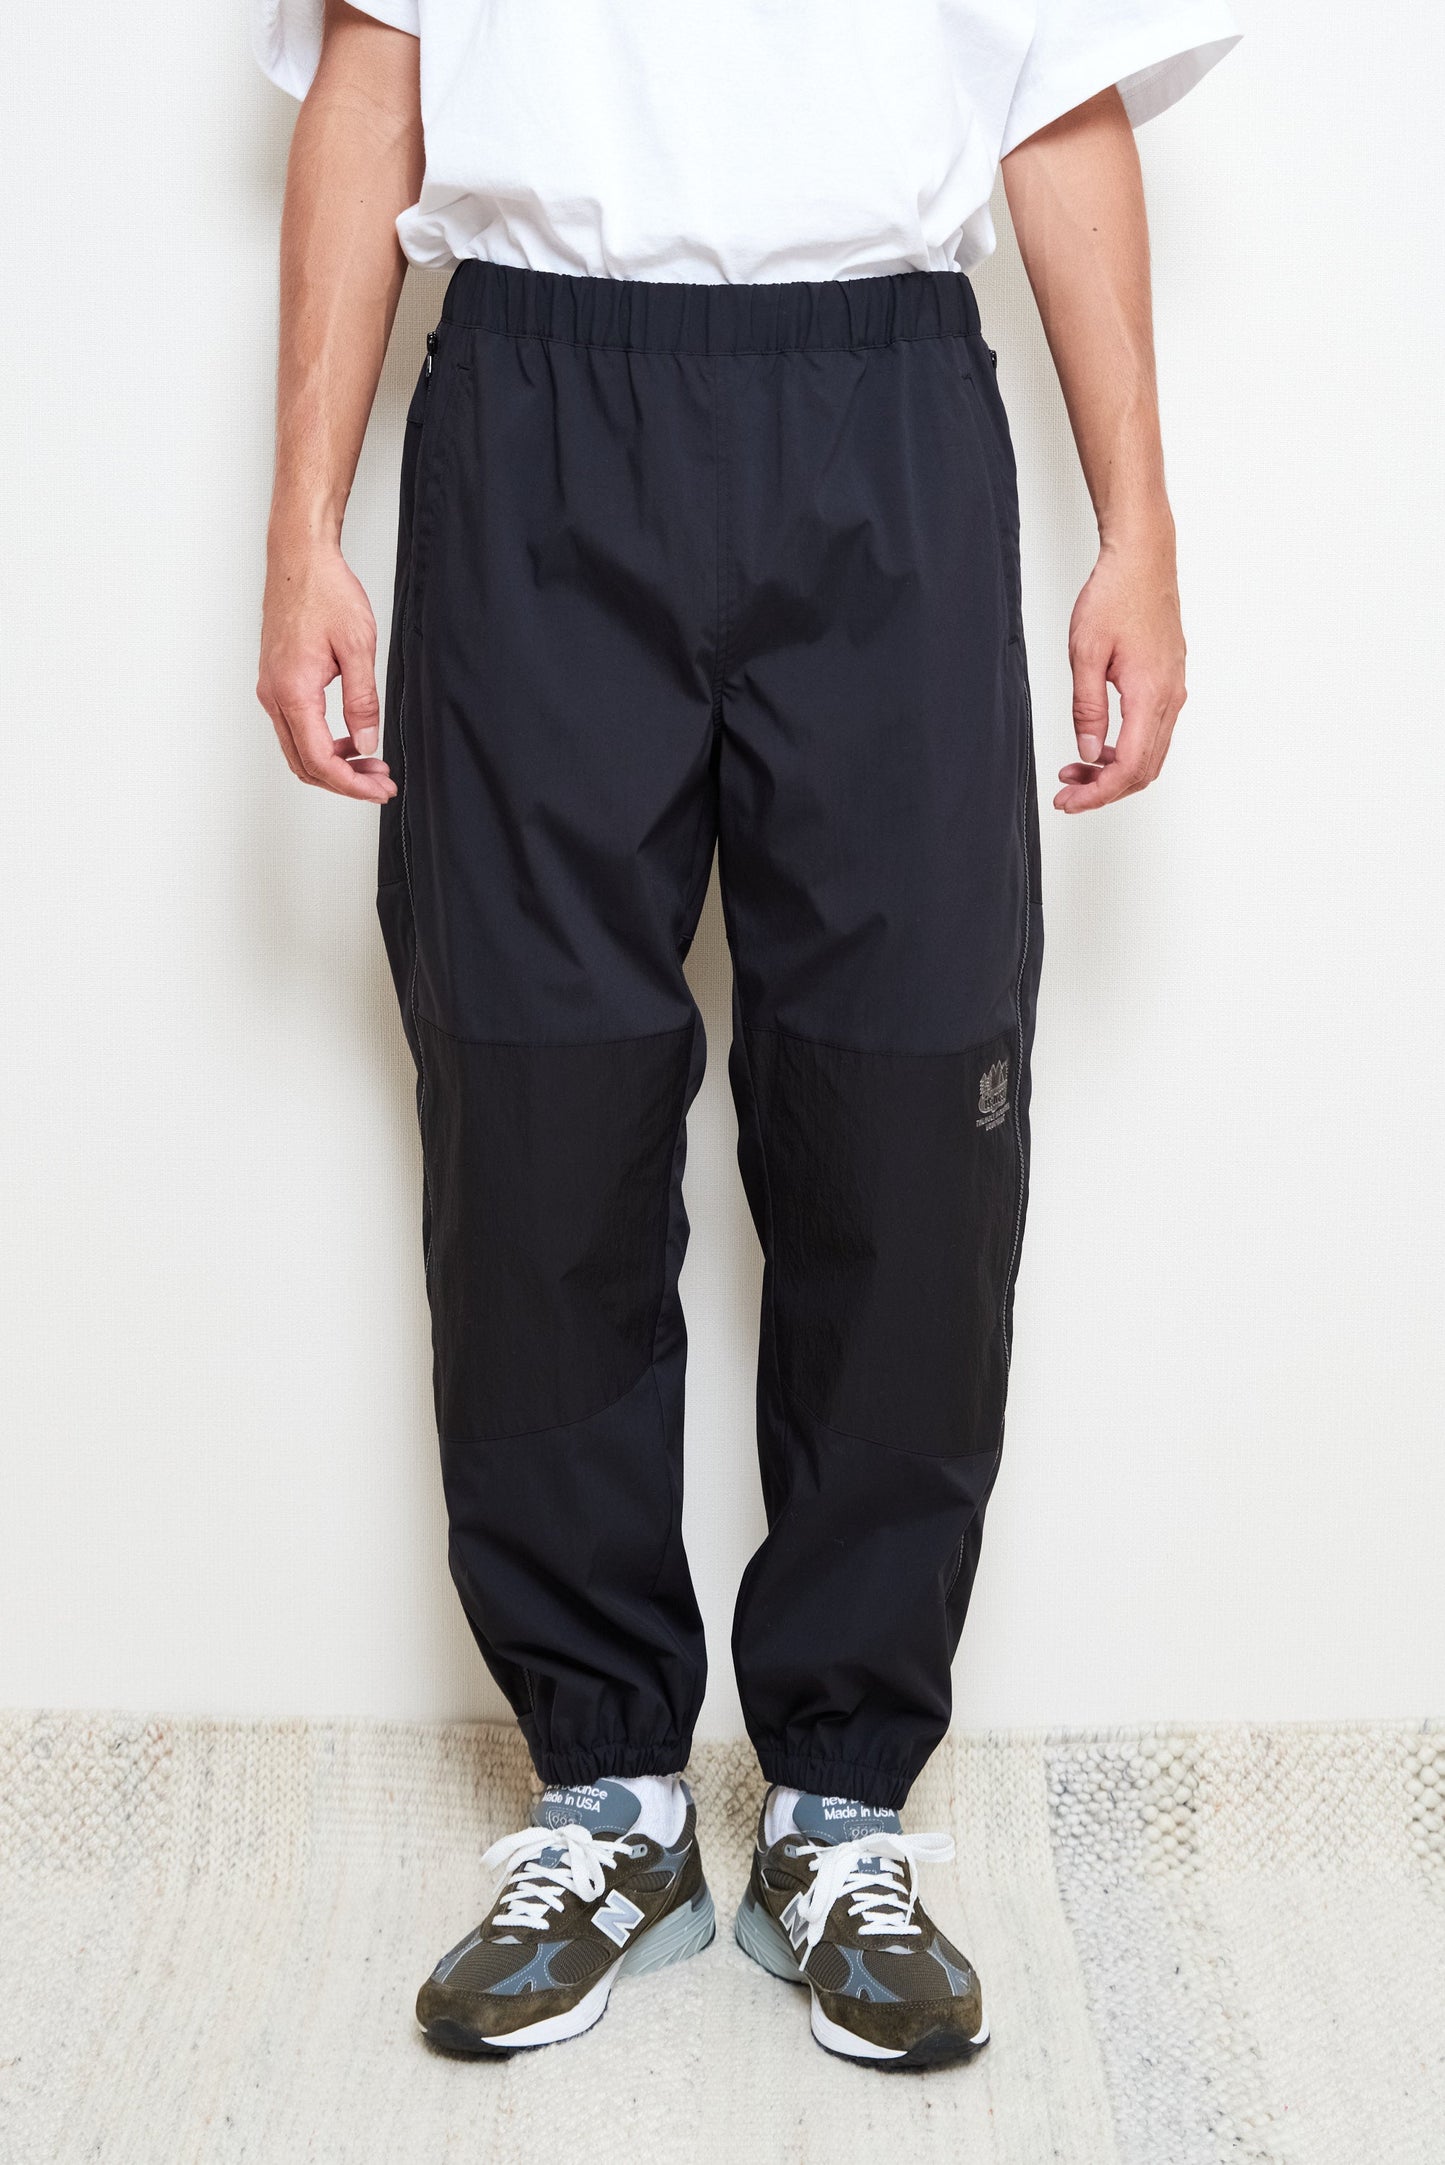 THE HOLY MOUNTAIN VENTILATION PANTS is-ness online shop 7